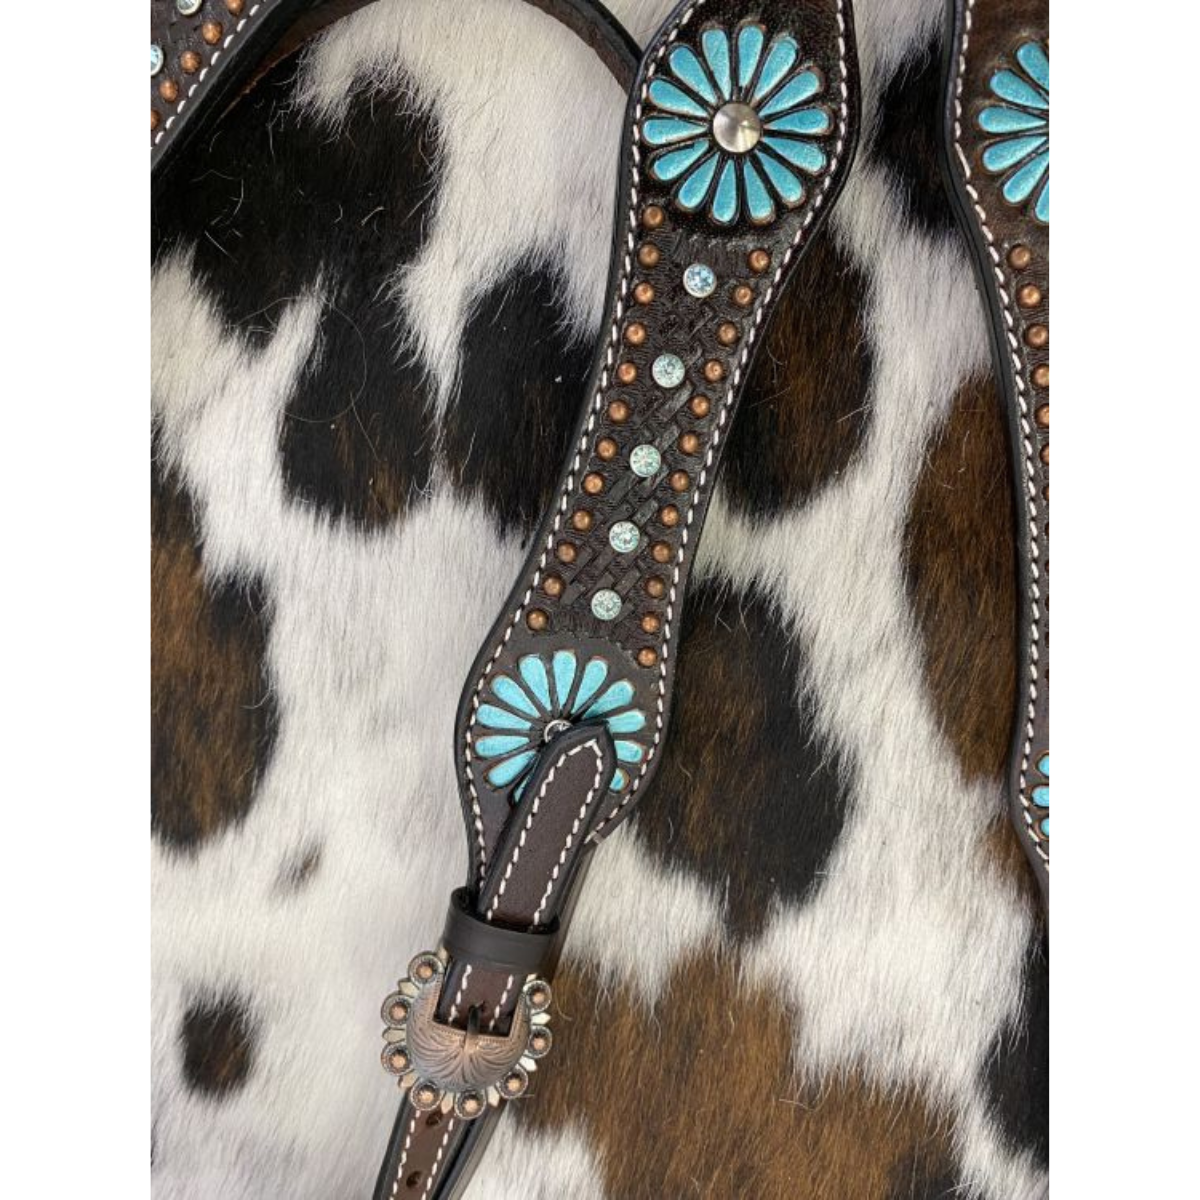 Showman ® Large Pony/ Small Horse size Dark brown leather headstall and breast collar set - Double T Saddles